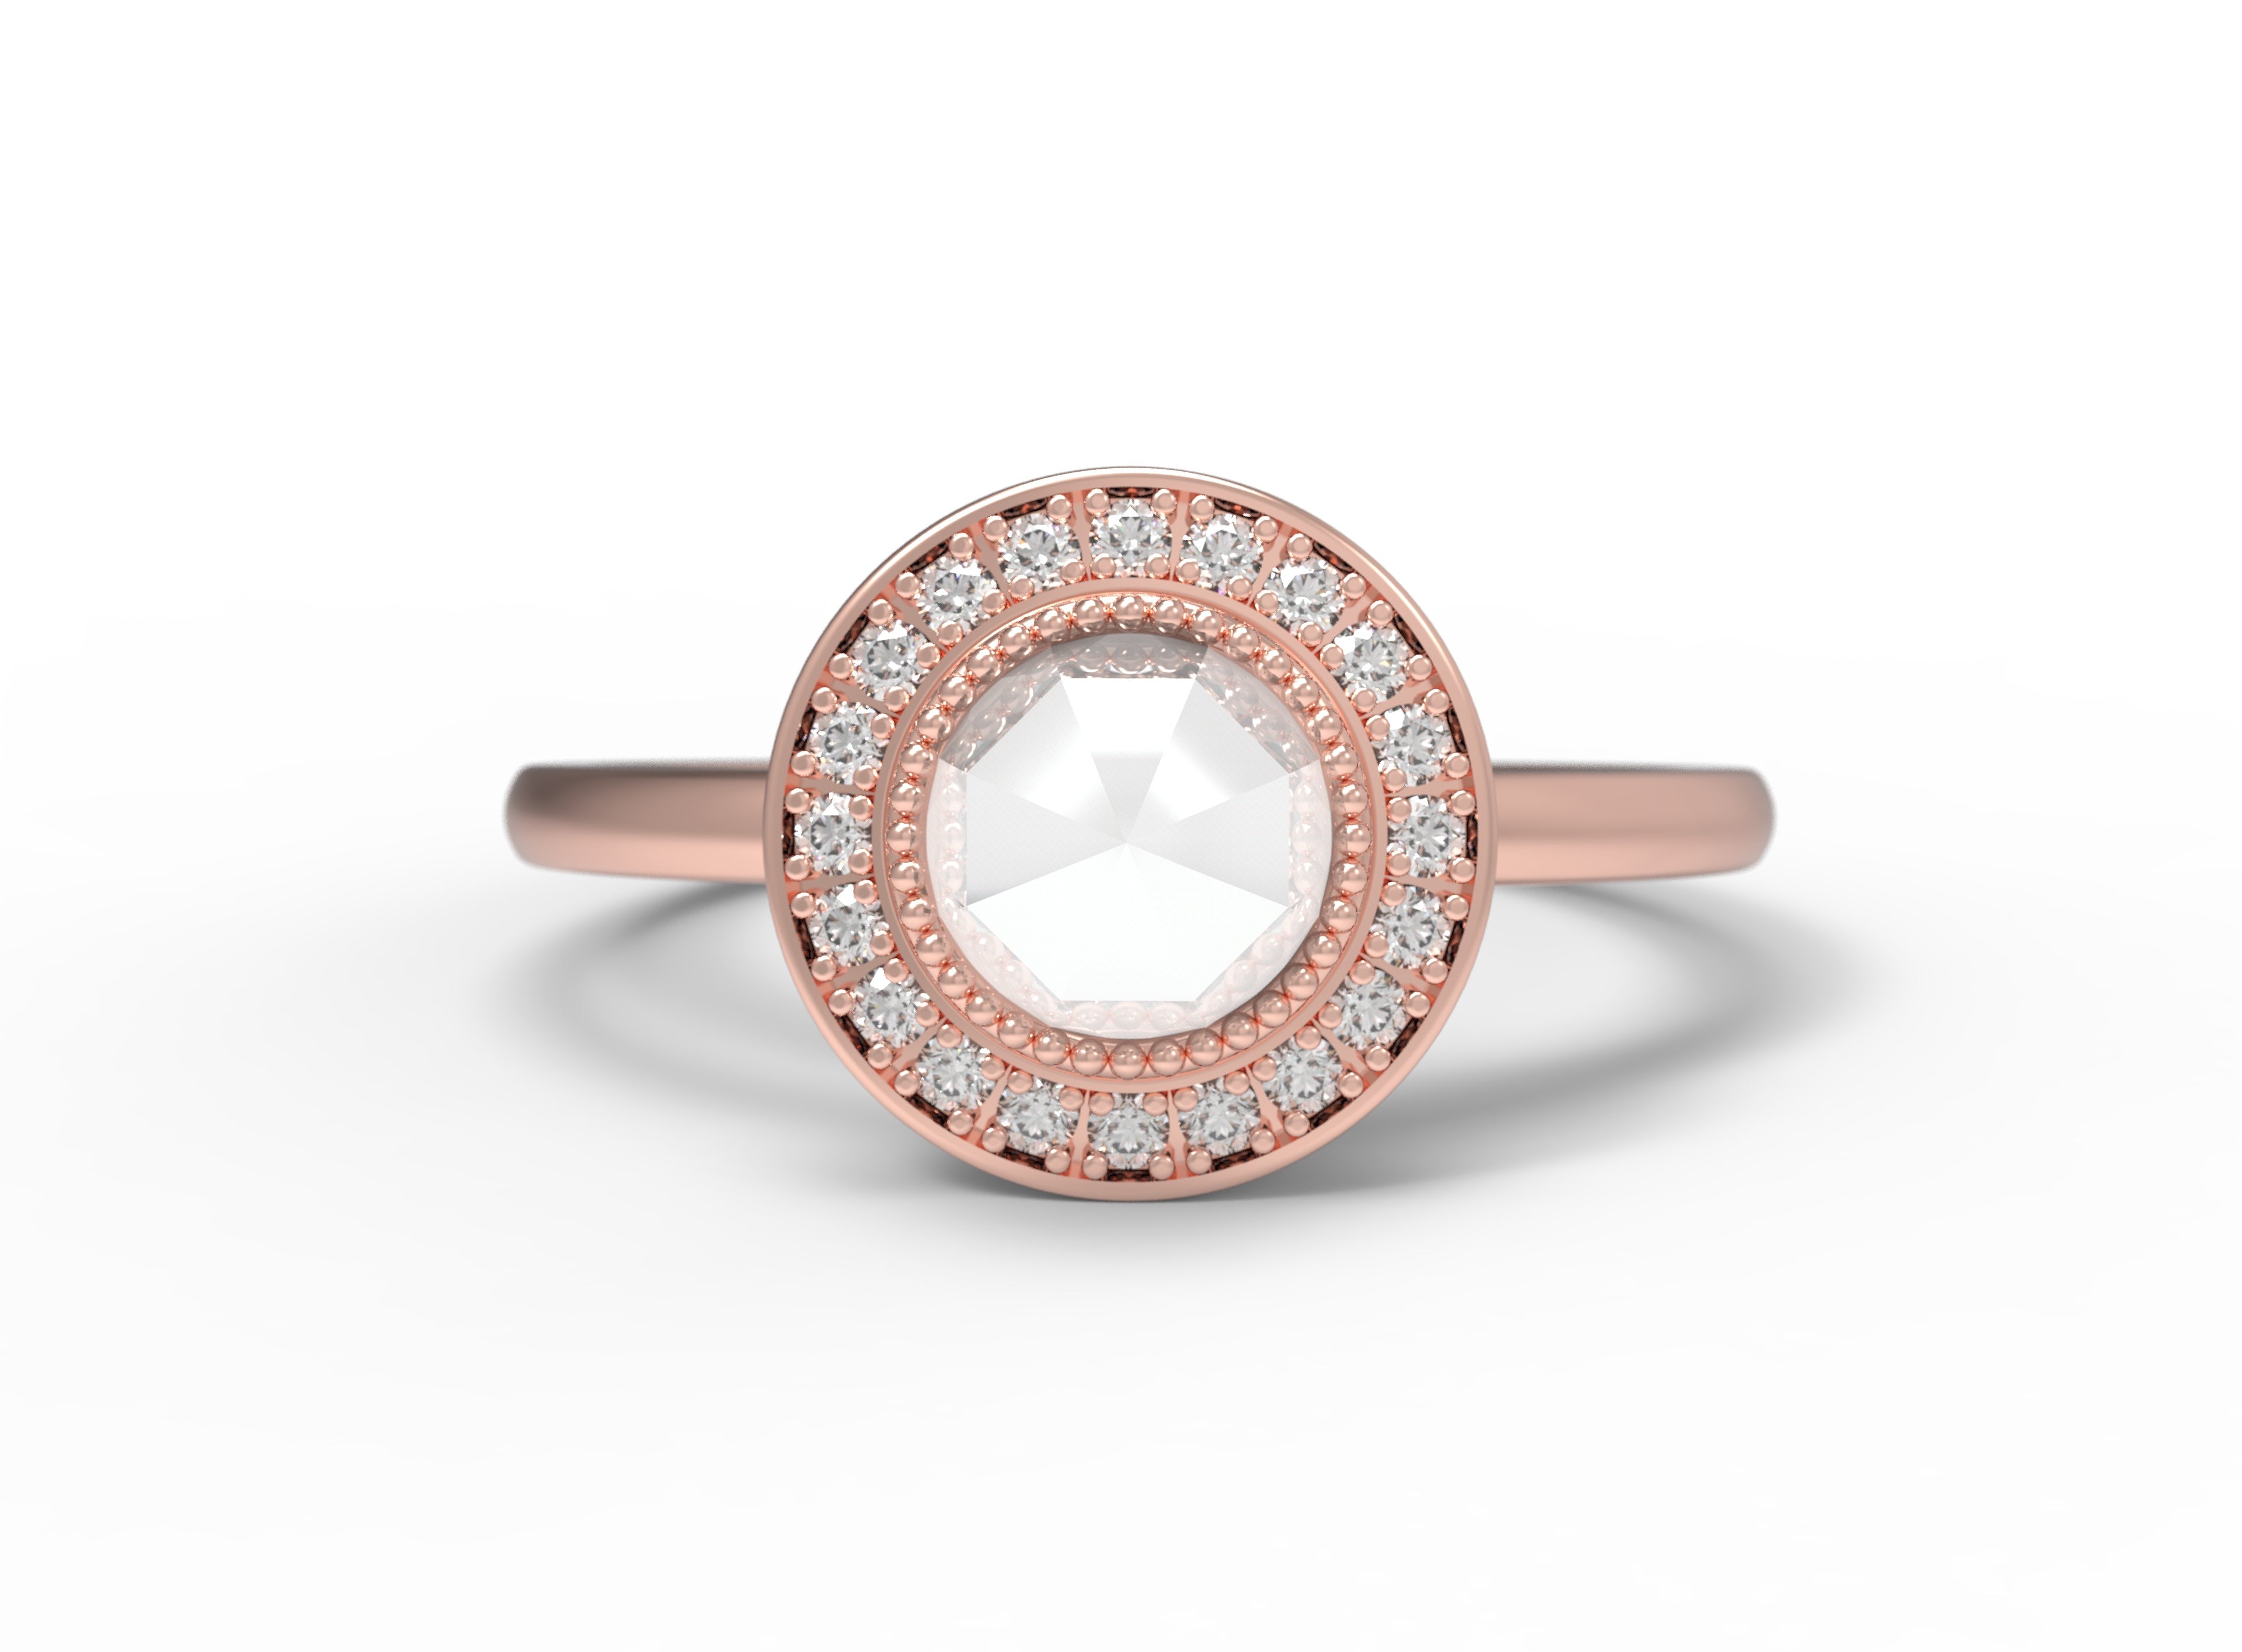 Close up of the Halo Aura Solitaire Engagement Ring in rose gold by Fluid Jewellery